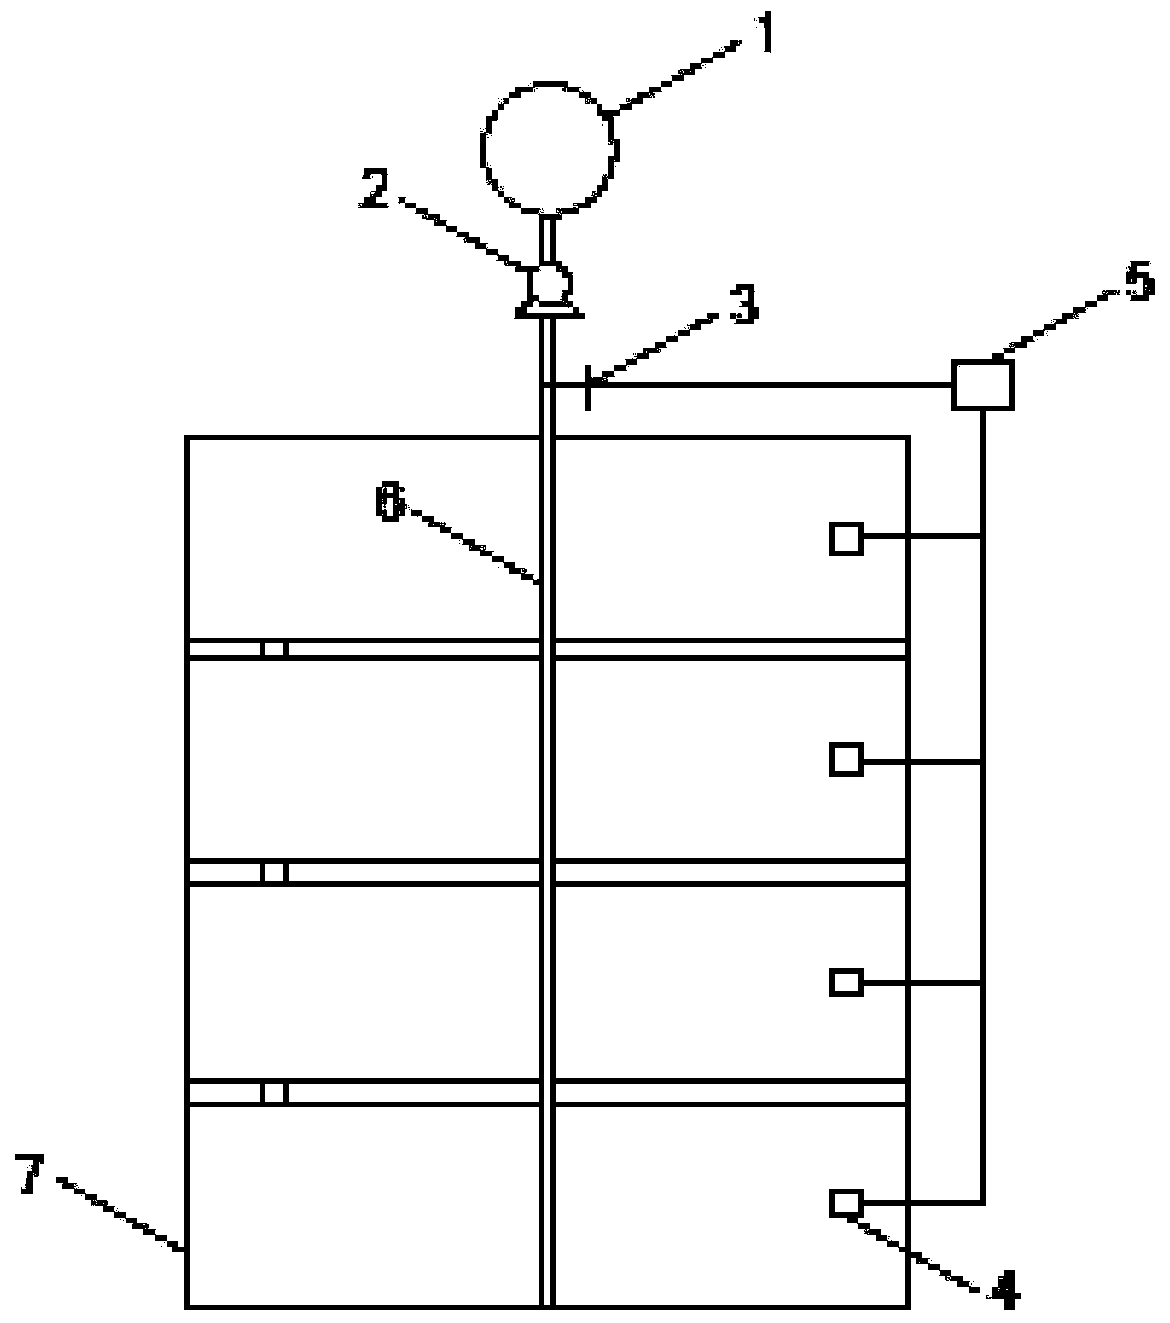 A rice field multi-port intelligent irrigation system and method thereof